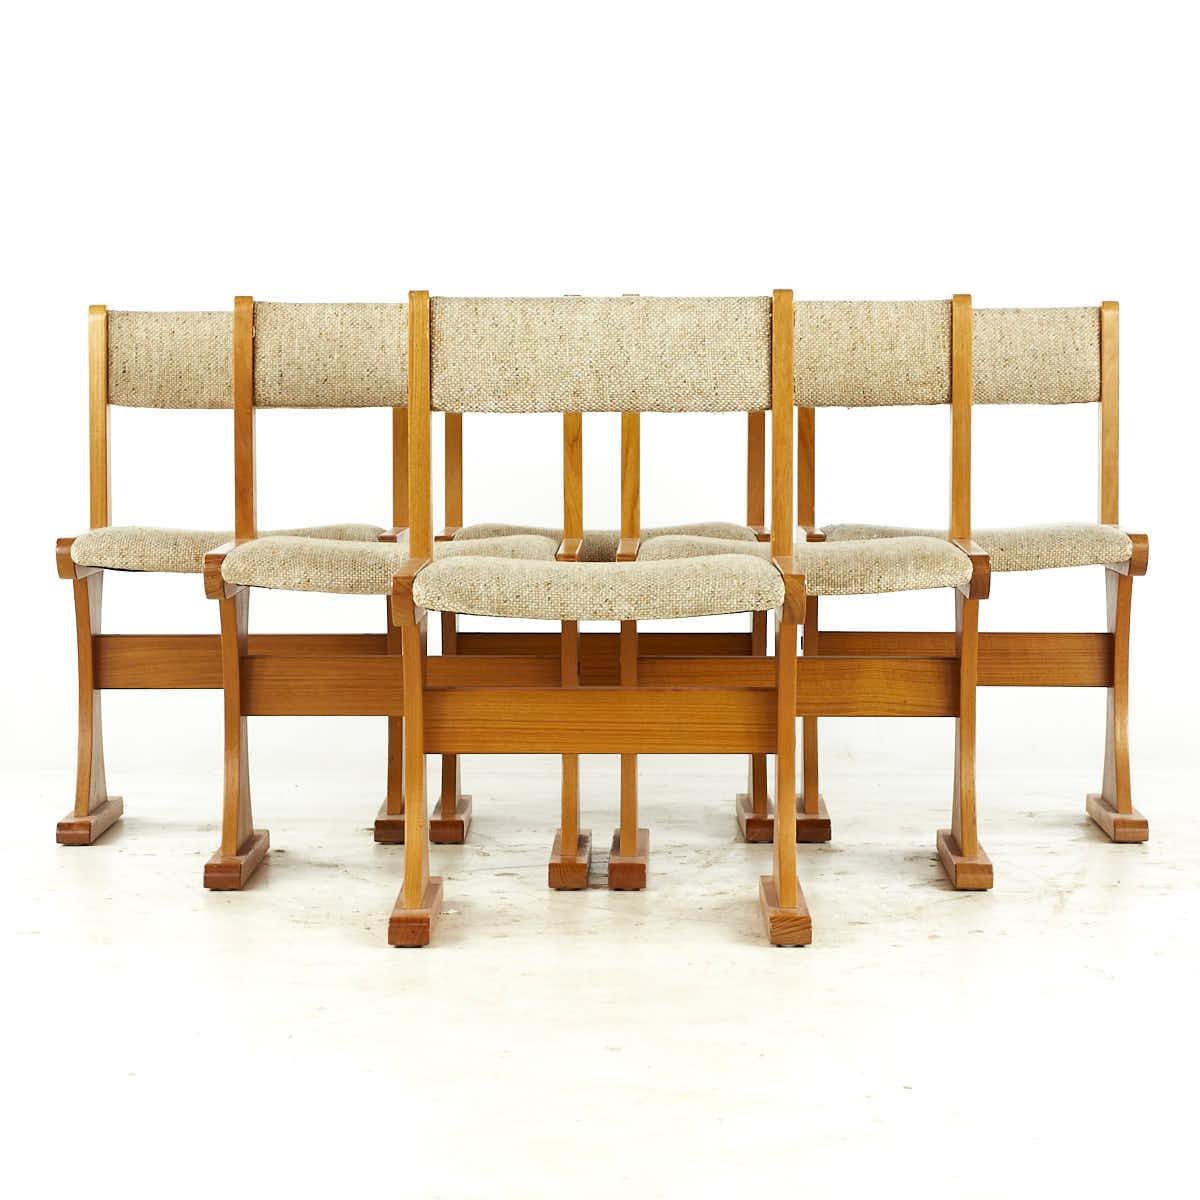 Gangso Mobler Style Mid Century Teak Dining Chairs - Set of 6

Each chair measures: 19 wide x 17.5 deep x 30.5 inches high, with a seat height of 17.75 inches

All pieces of furniture can be had in what we call restored vintage condition. That means